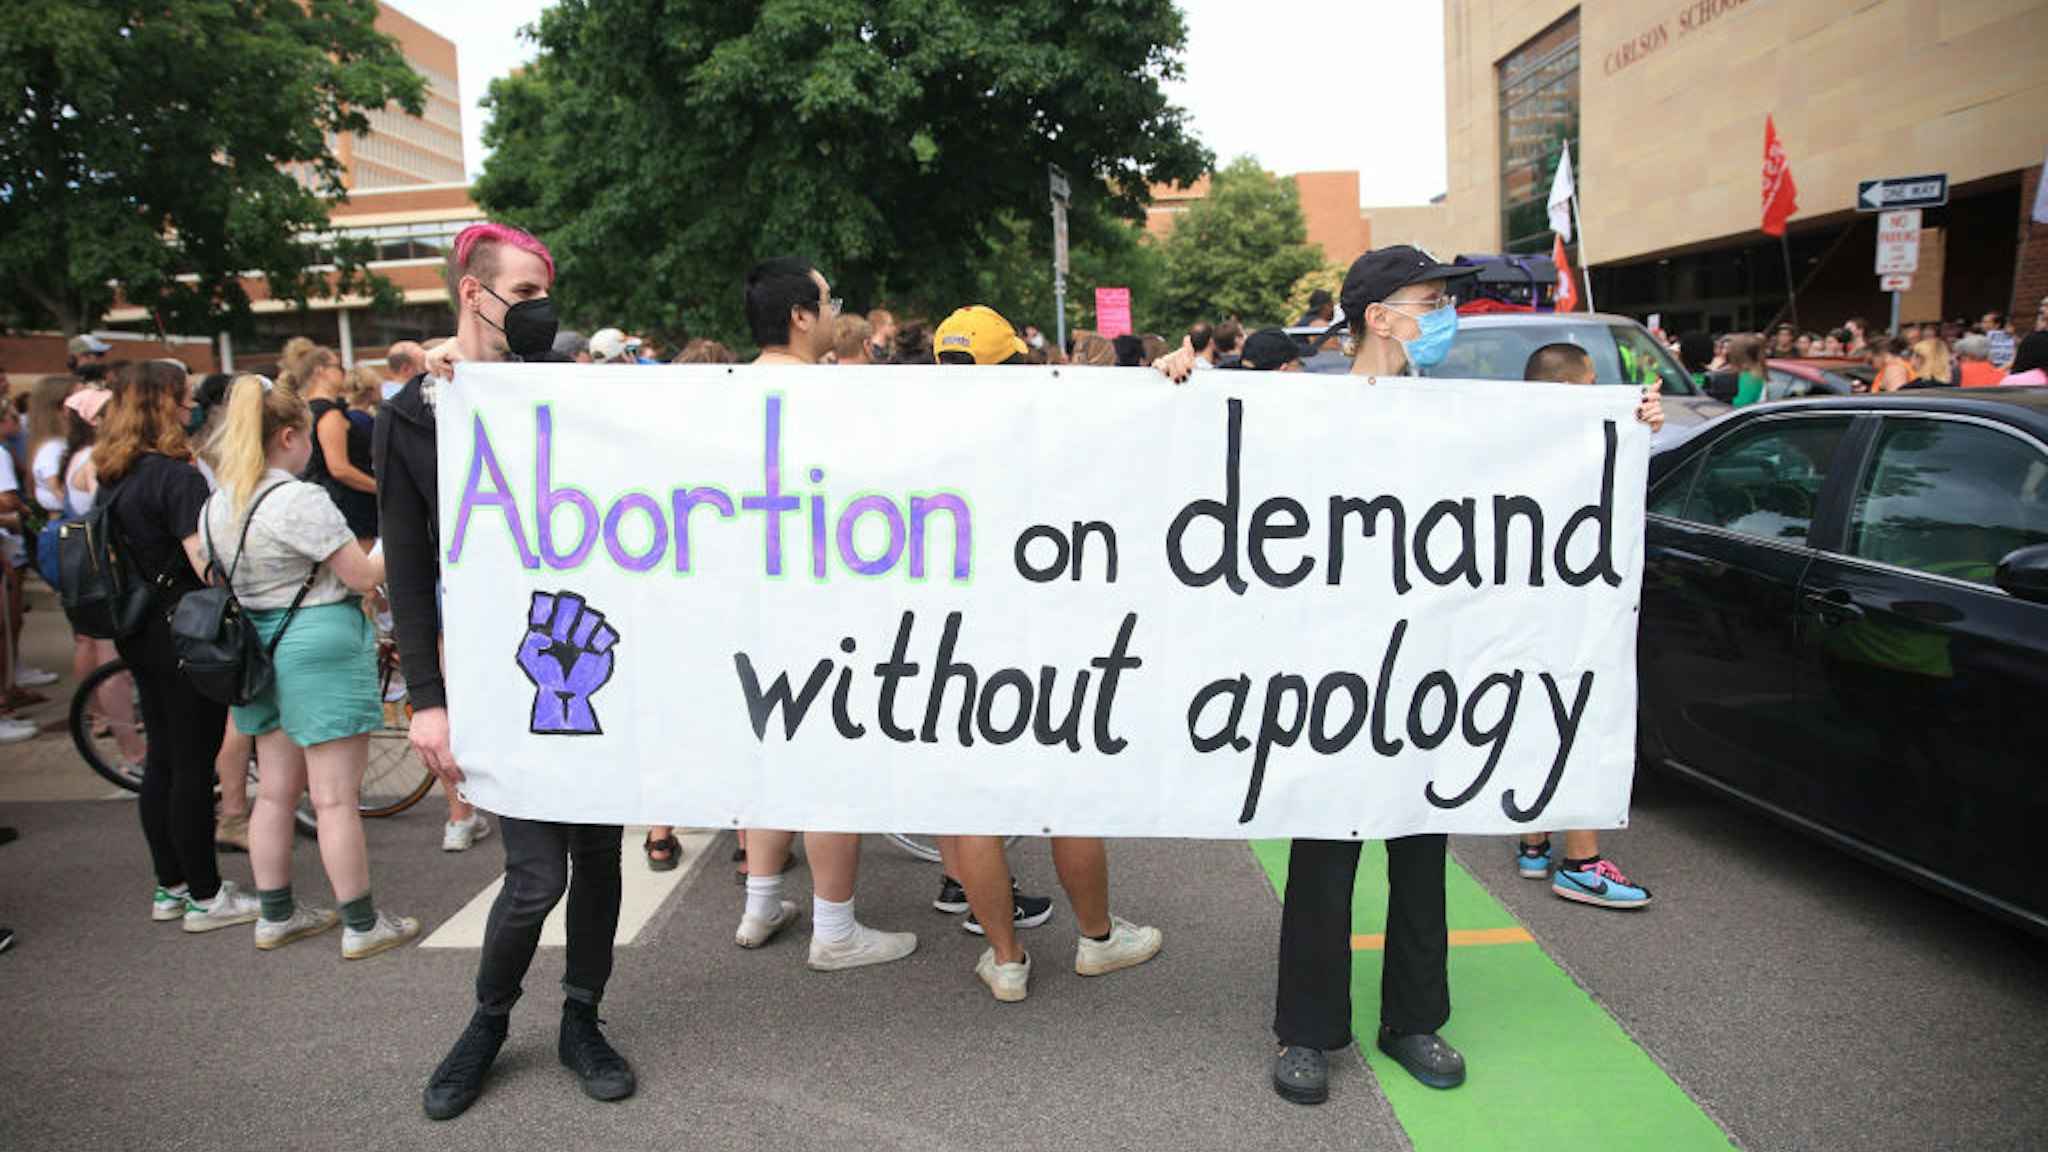 MINNEAPOLIS, UNITED STATES - JUNE 24: Abortion rights demonstrators gather near the Hubert H. Humphrey School of Public Affairs at the University of Minnesota in Minneapolis, Minnesota, United States on June 24, 2022. The U.S. Supreme Court on Friday overturned the landmark Roe v. Wade case, ending the constitutional protections for abortions that were in place for nearly 50 years. While some statesâ laws will and have changed to outlaw abortions, abortion remains legal in Minnesota. (Photo by Nikolas Liepins/Anadolu Agency via Getty Images)